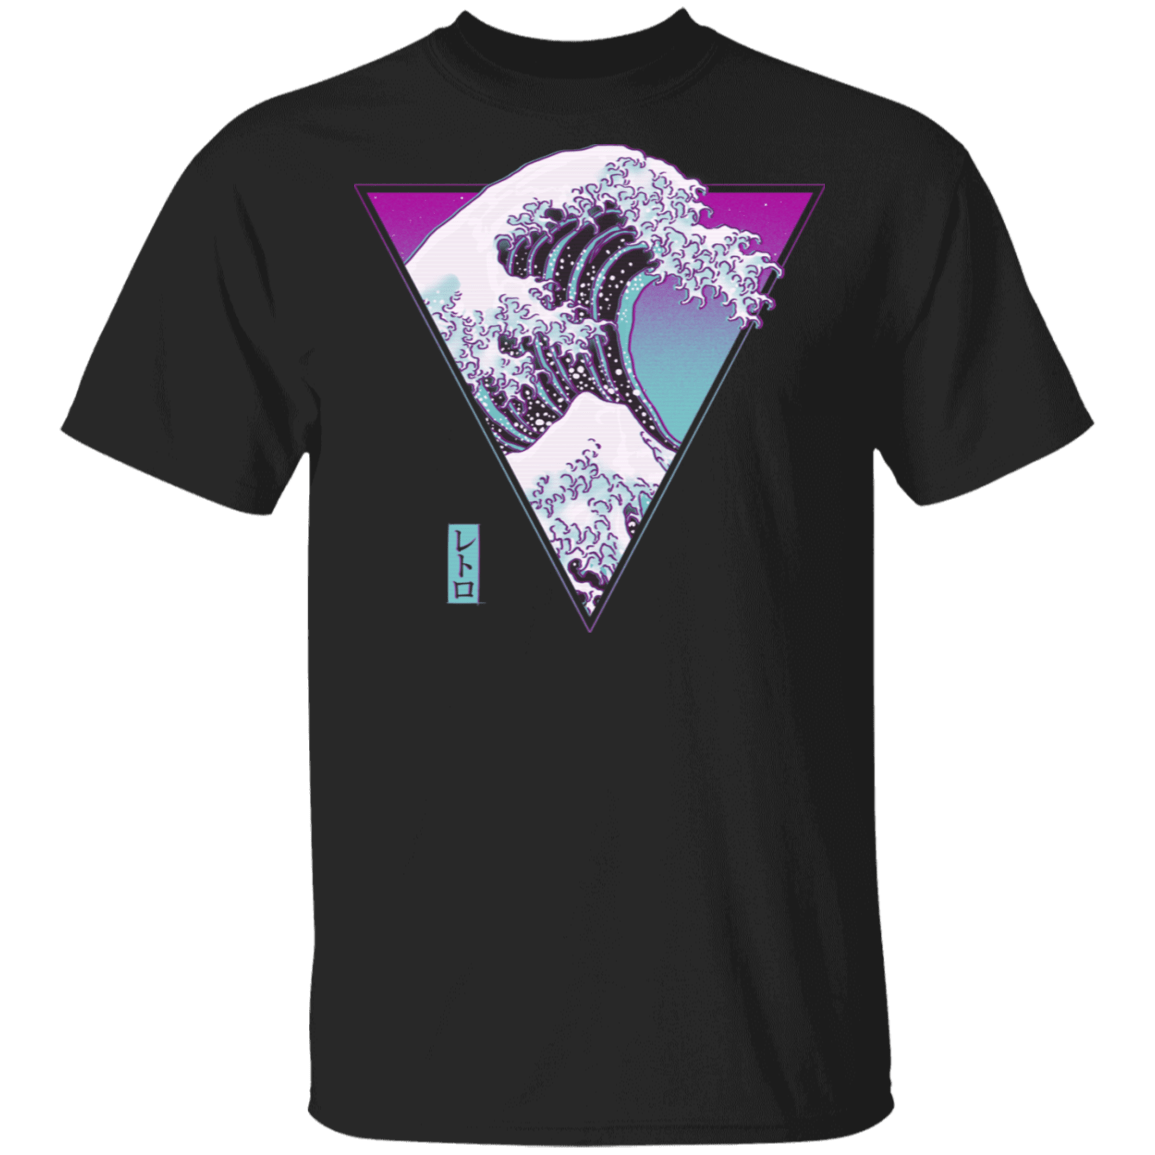 The Great Synthwave T-Shirt